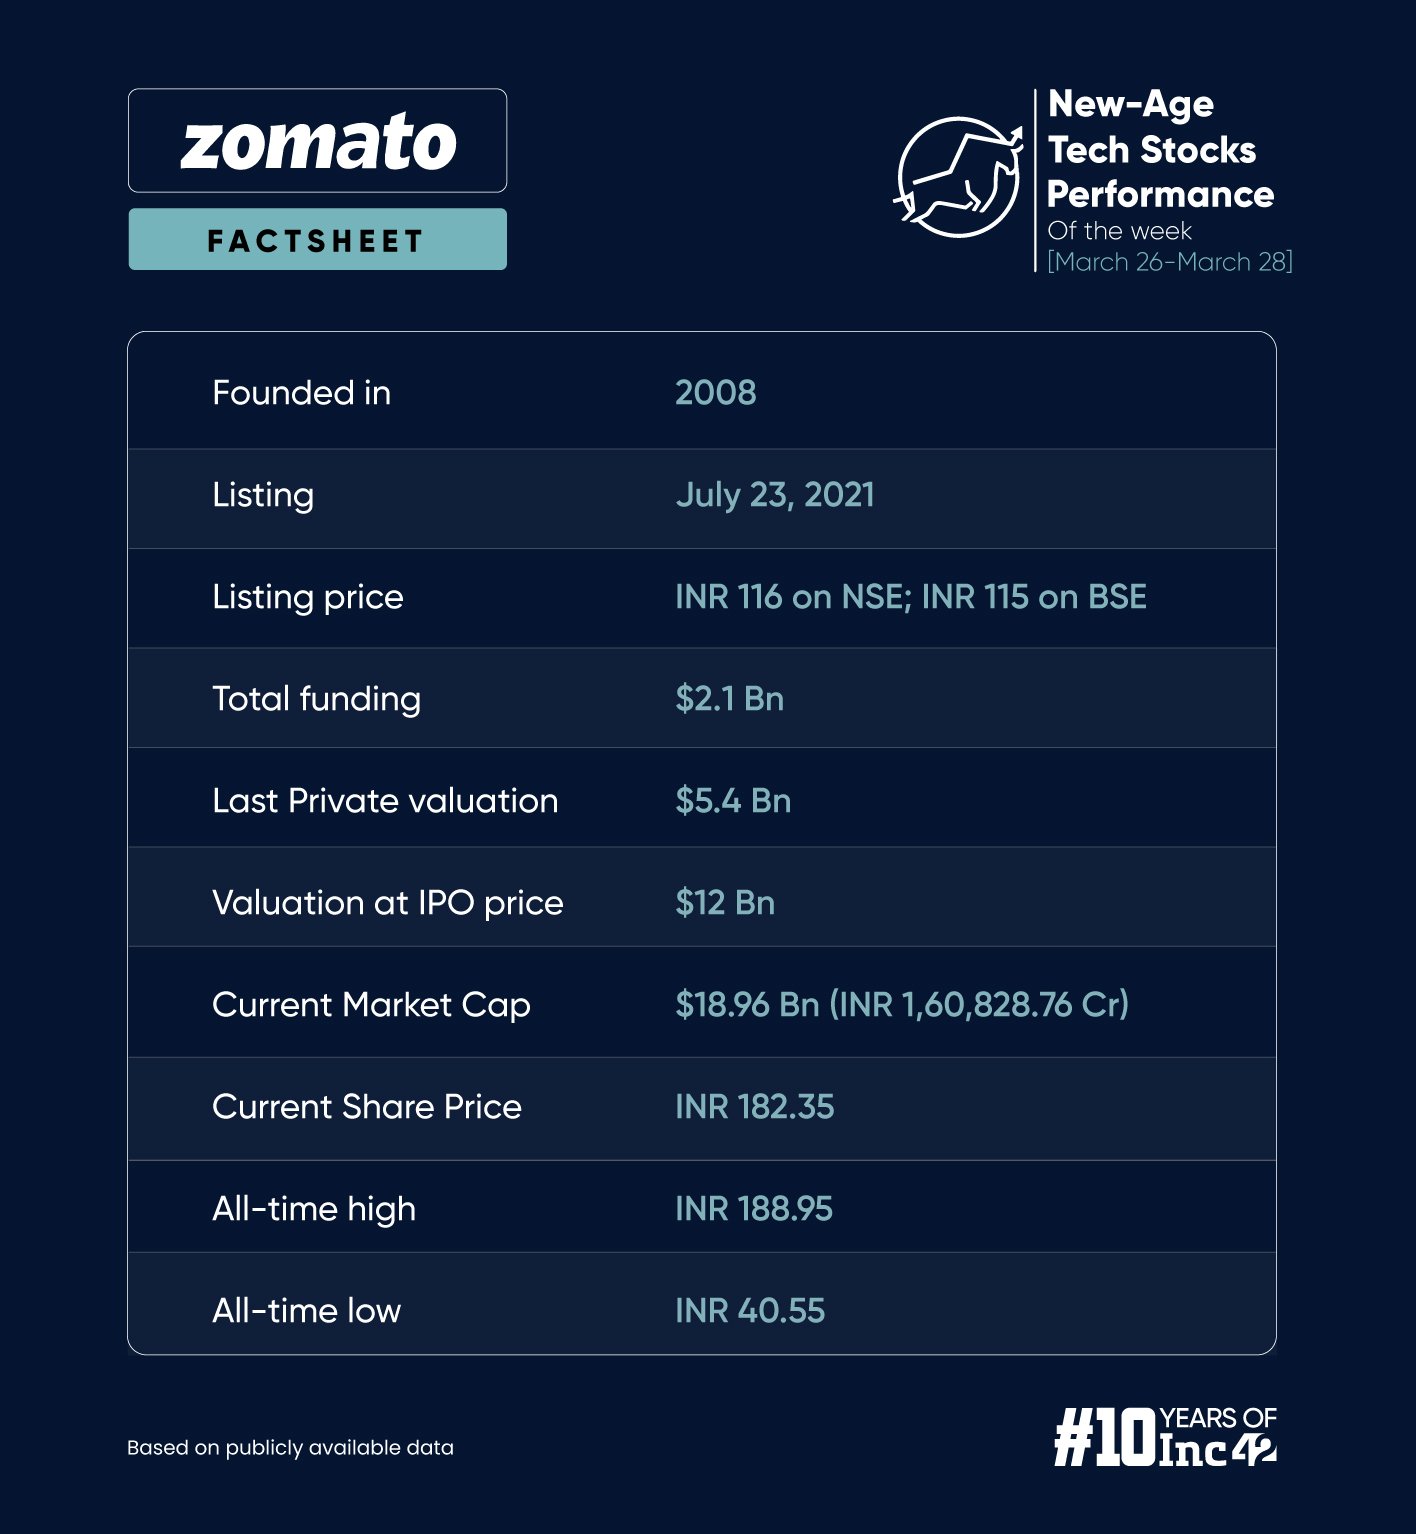 Zomato’s New All-Time High